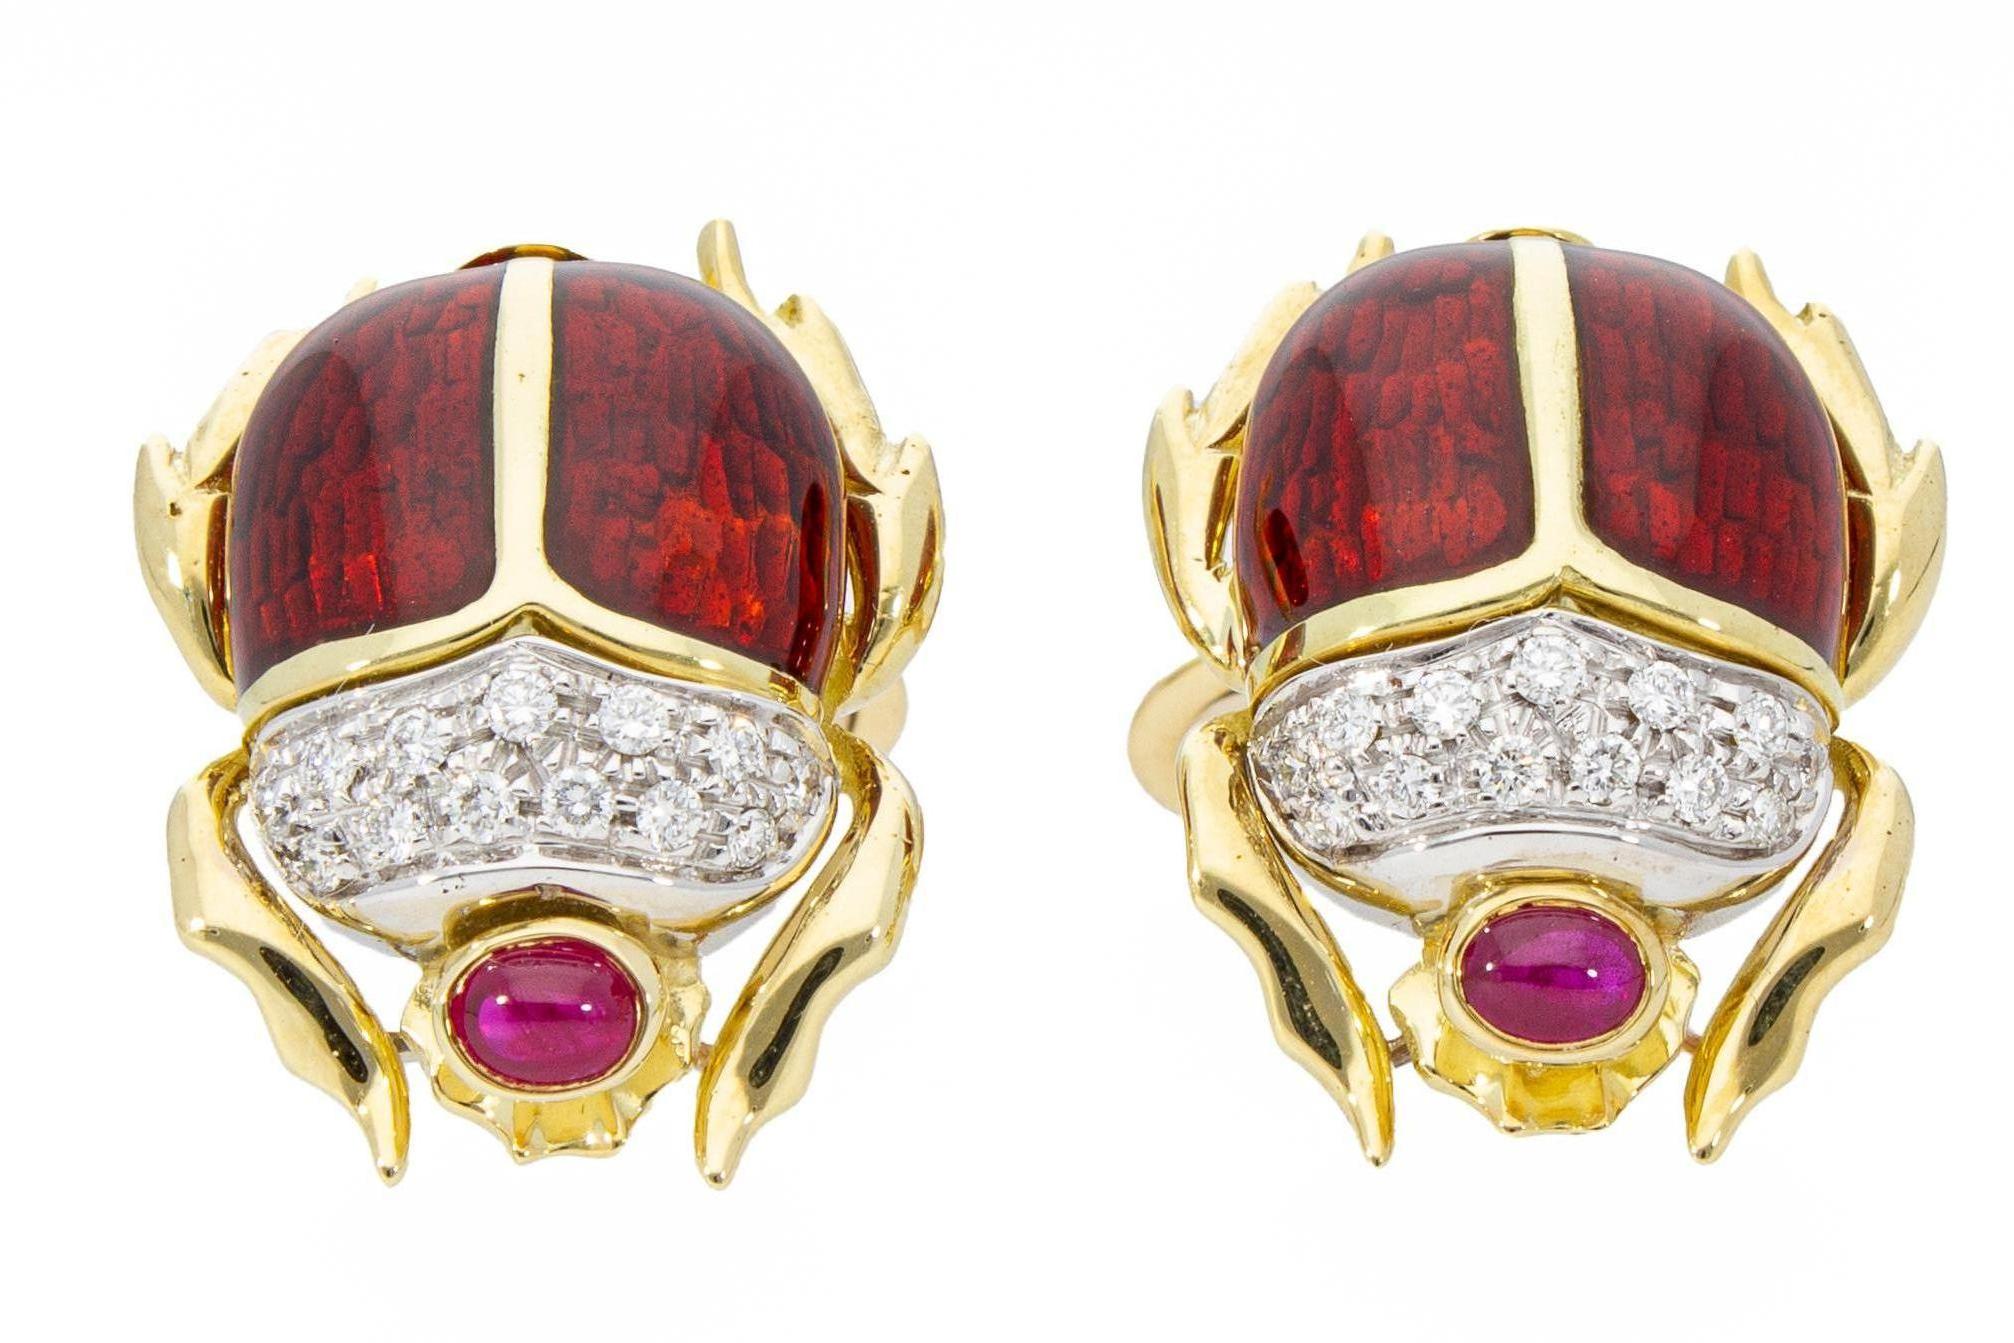 The cufflinks are in the shape of a beetle, they are in 18 Kt yellow gold and red enamel with firework. 
The cufflinks have a pavé of diamonds with a total carat weight of 0.26 ct and 2 oval cabochon-cut rubies with a total carat weight of 0.50 ct.